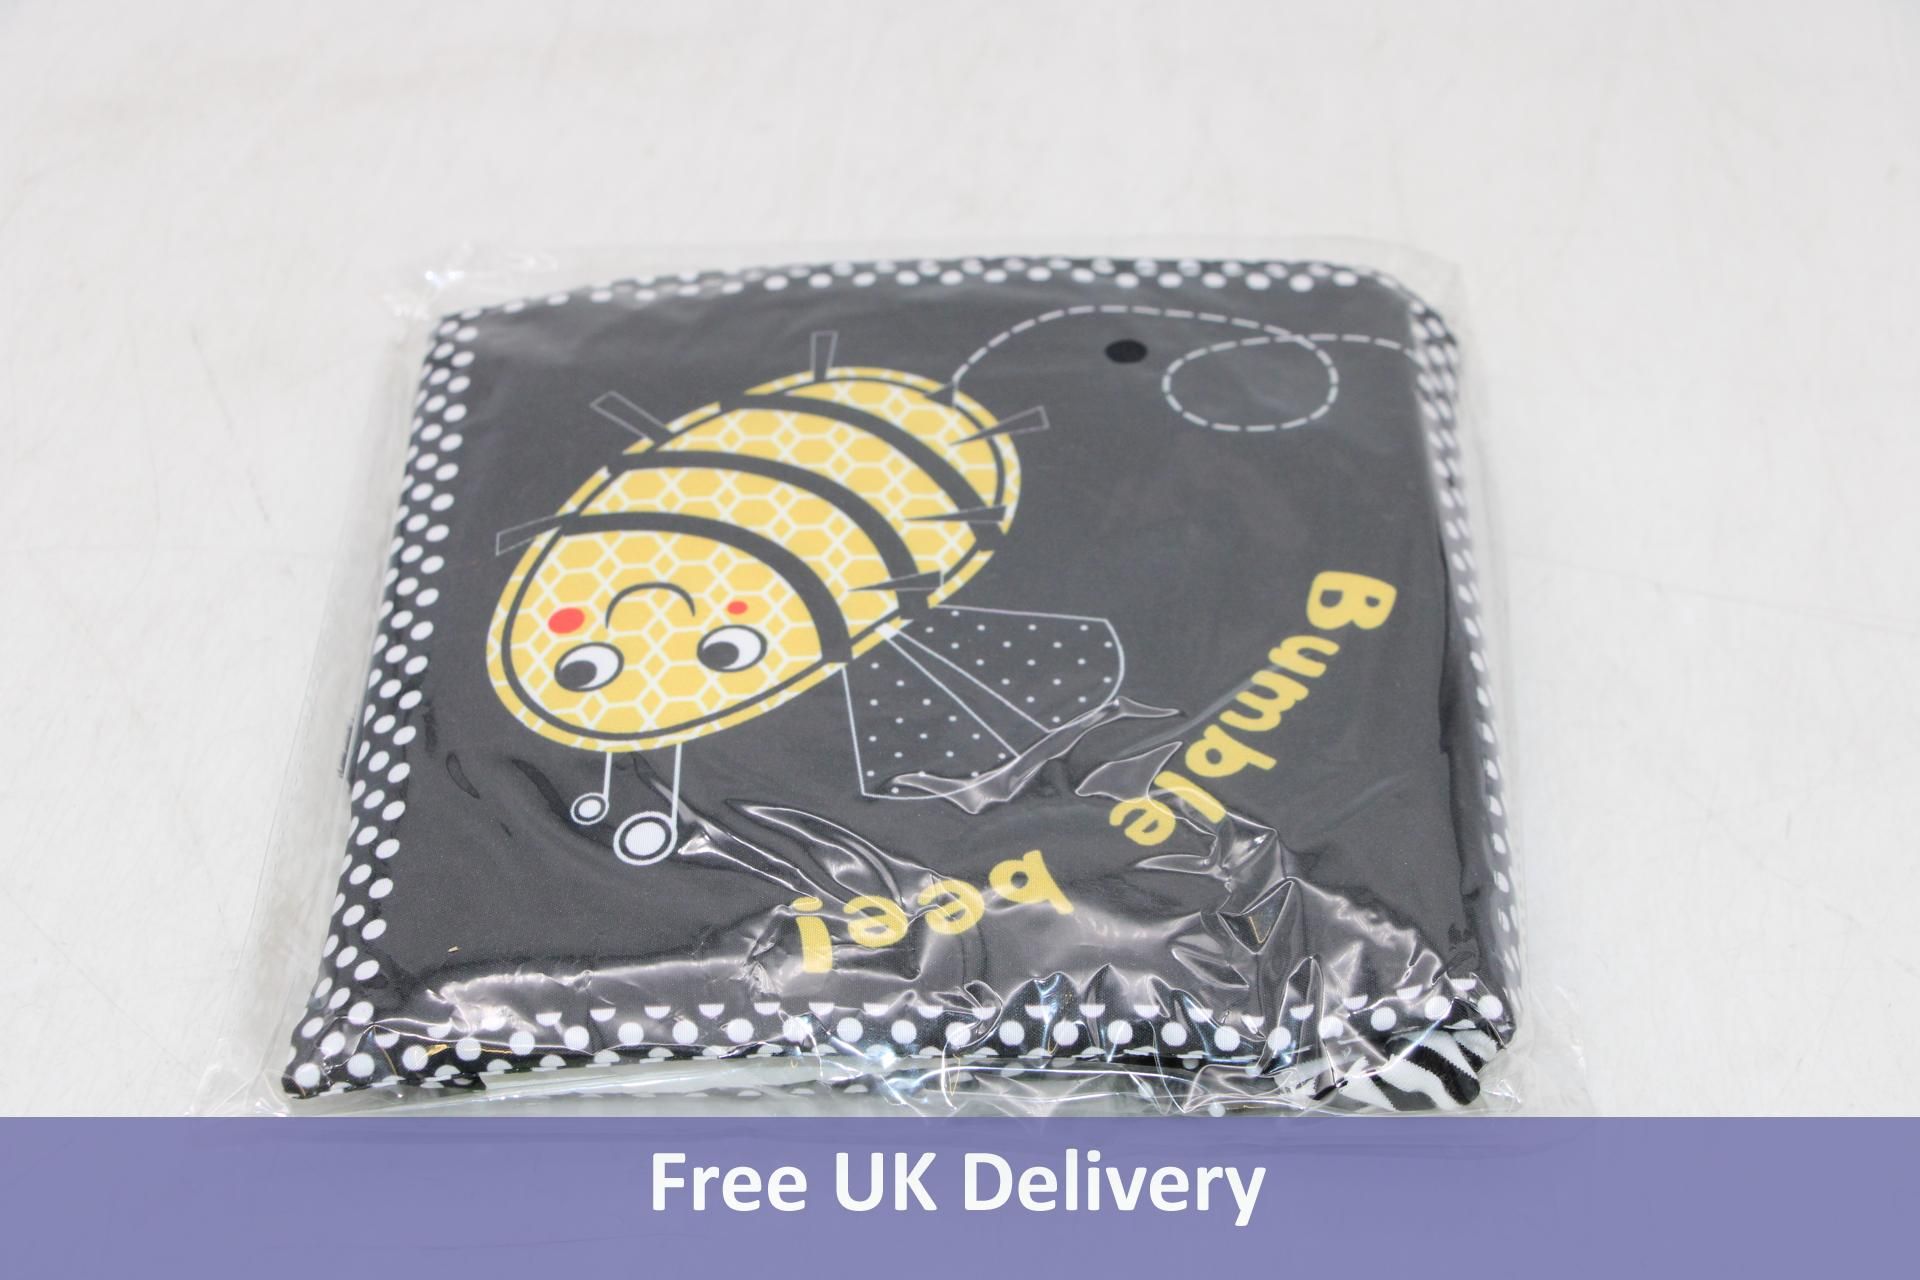 Fifteen Bumble Bee Babies Crinkle Soft Fabric Sensory Book, Black/Yellow, Age 0-12 Months